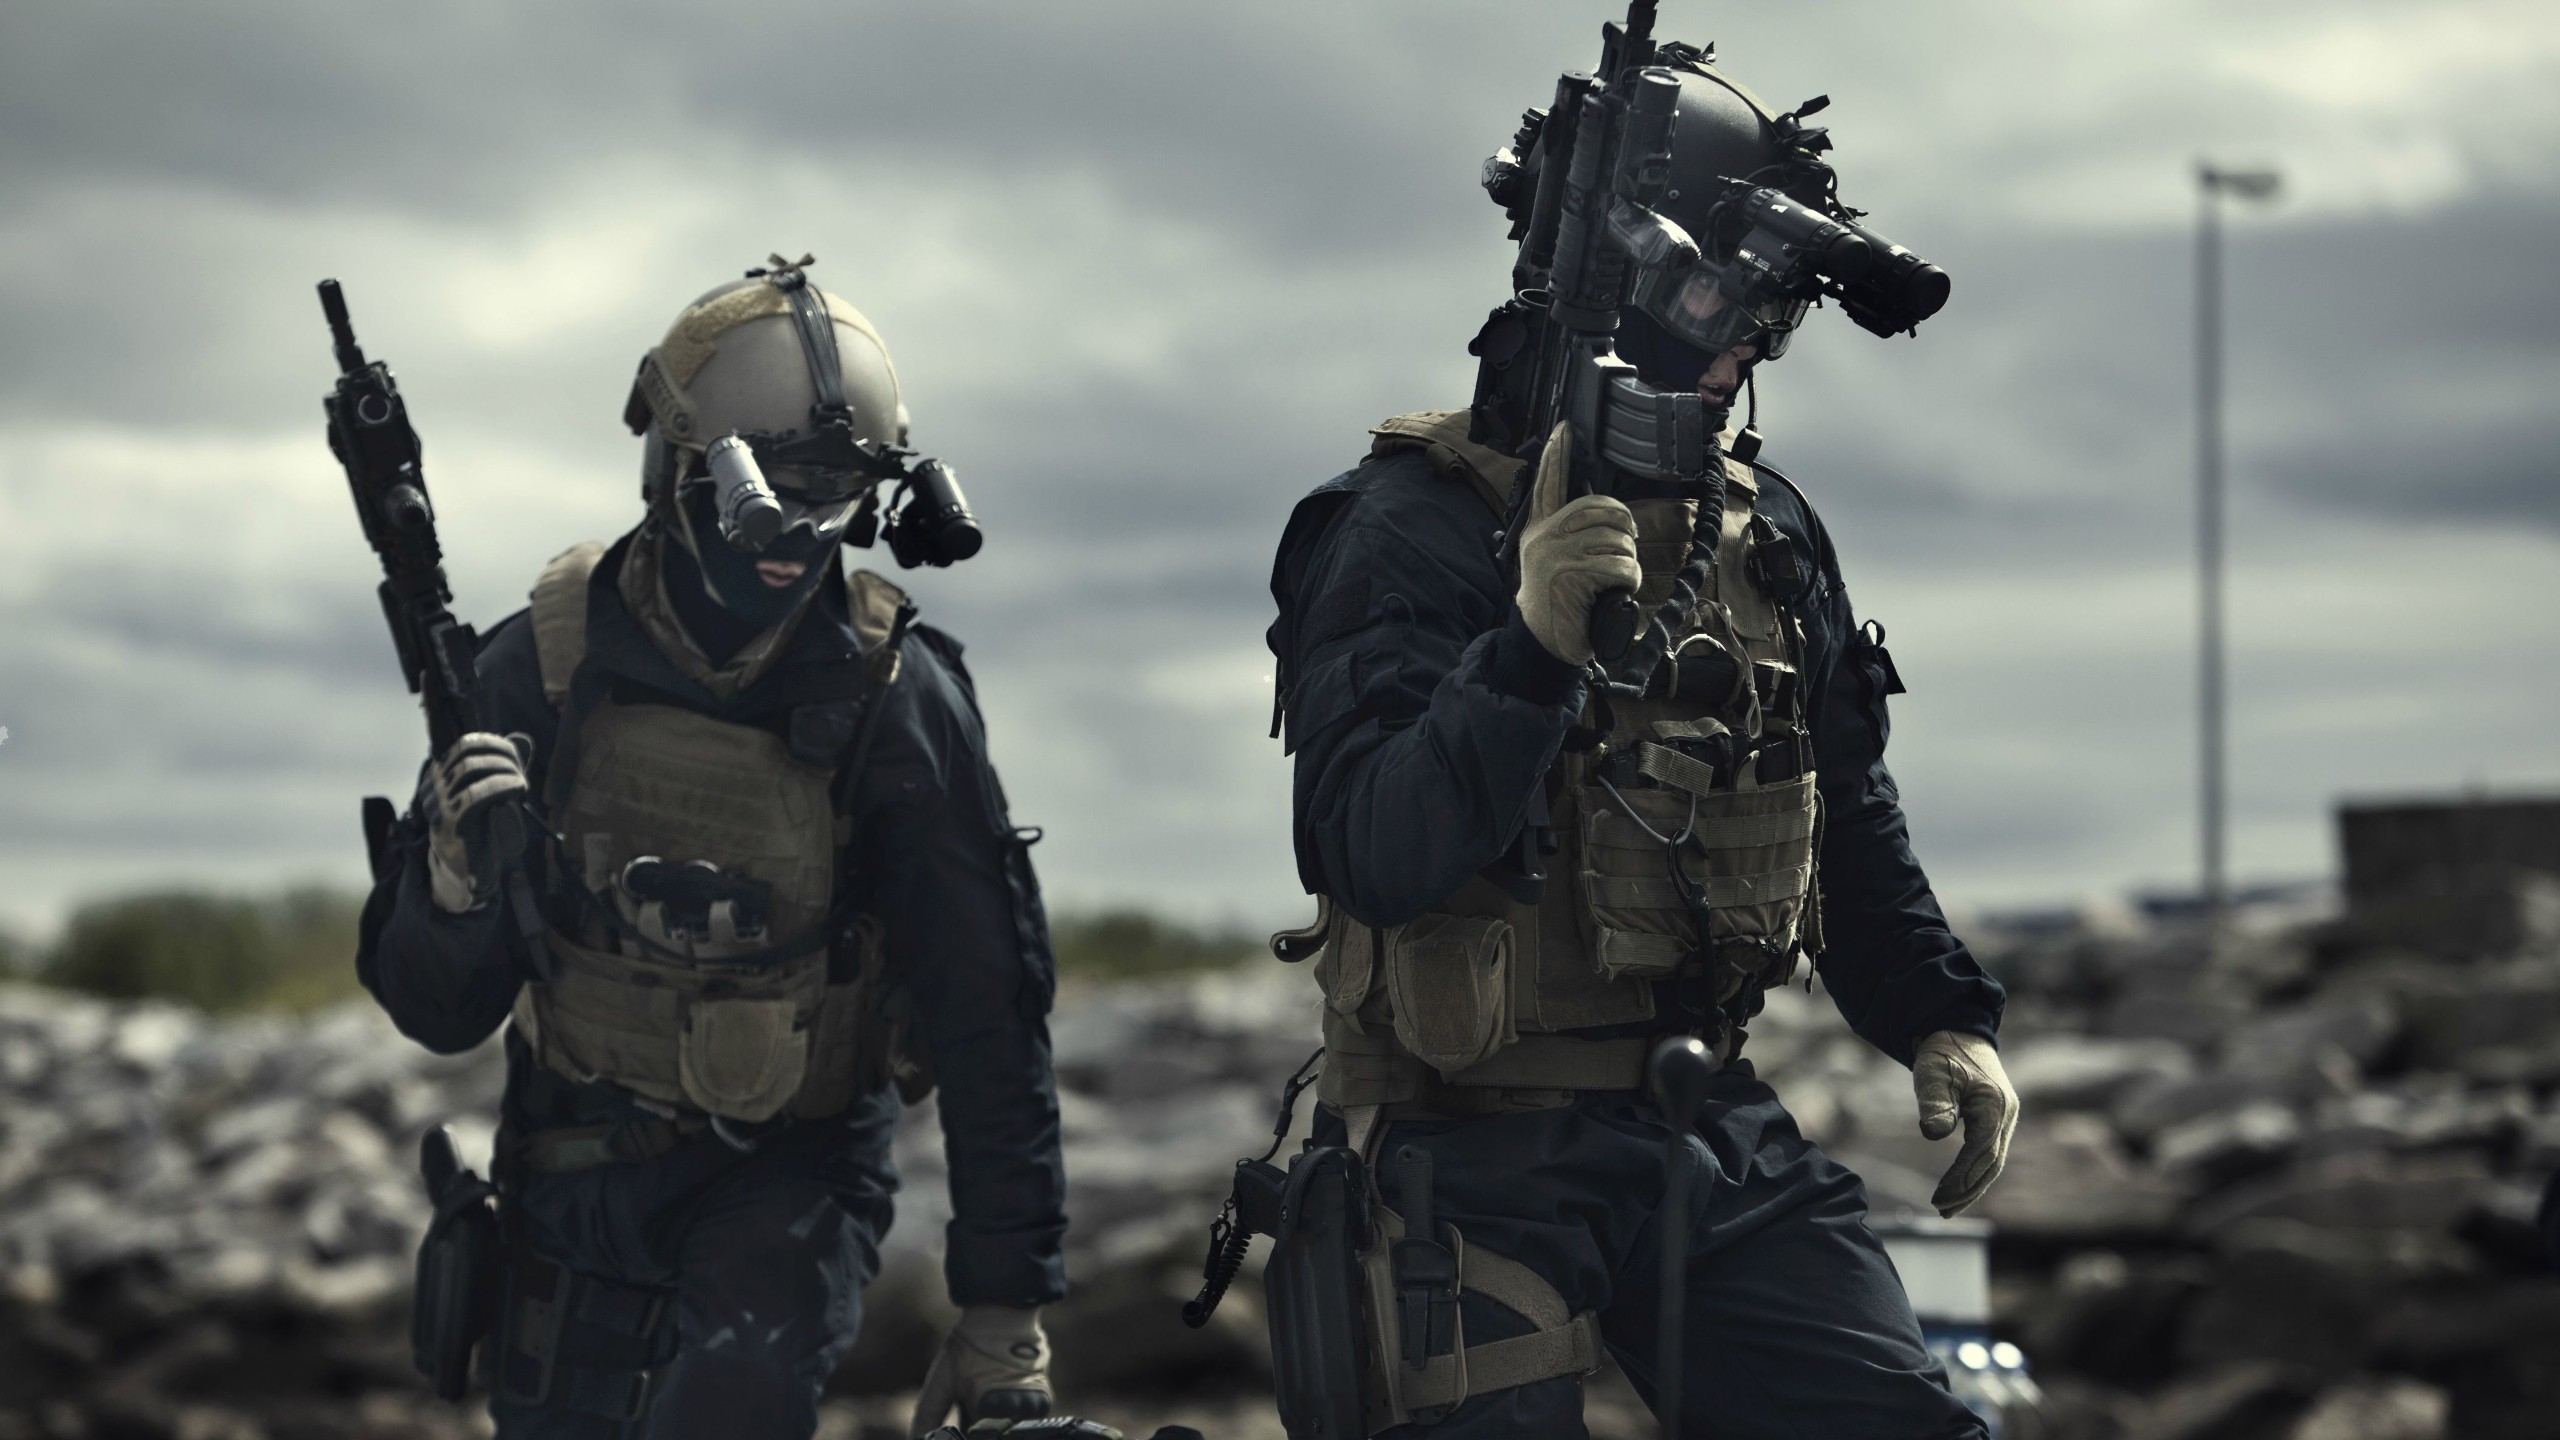 People 2560x1440 military Norway Norwegian Army special forces assault rifle tactical